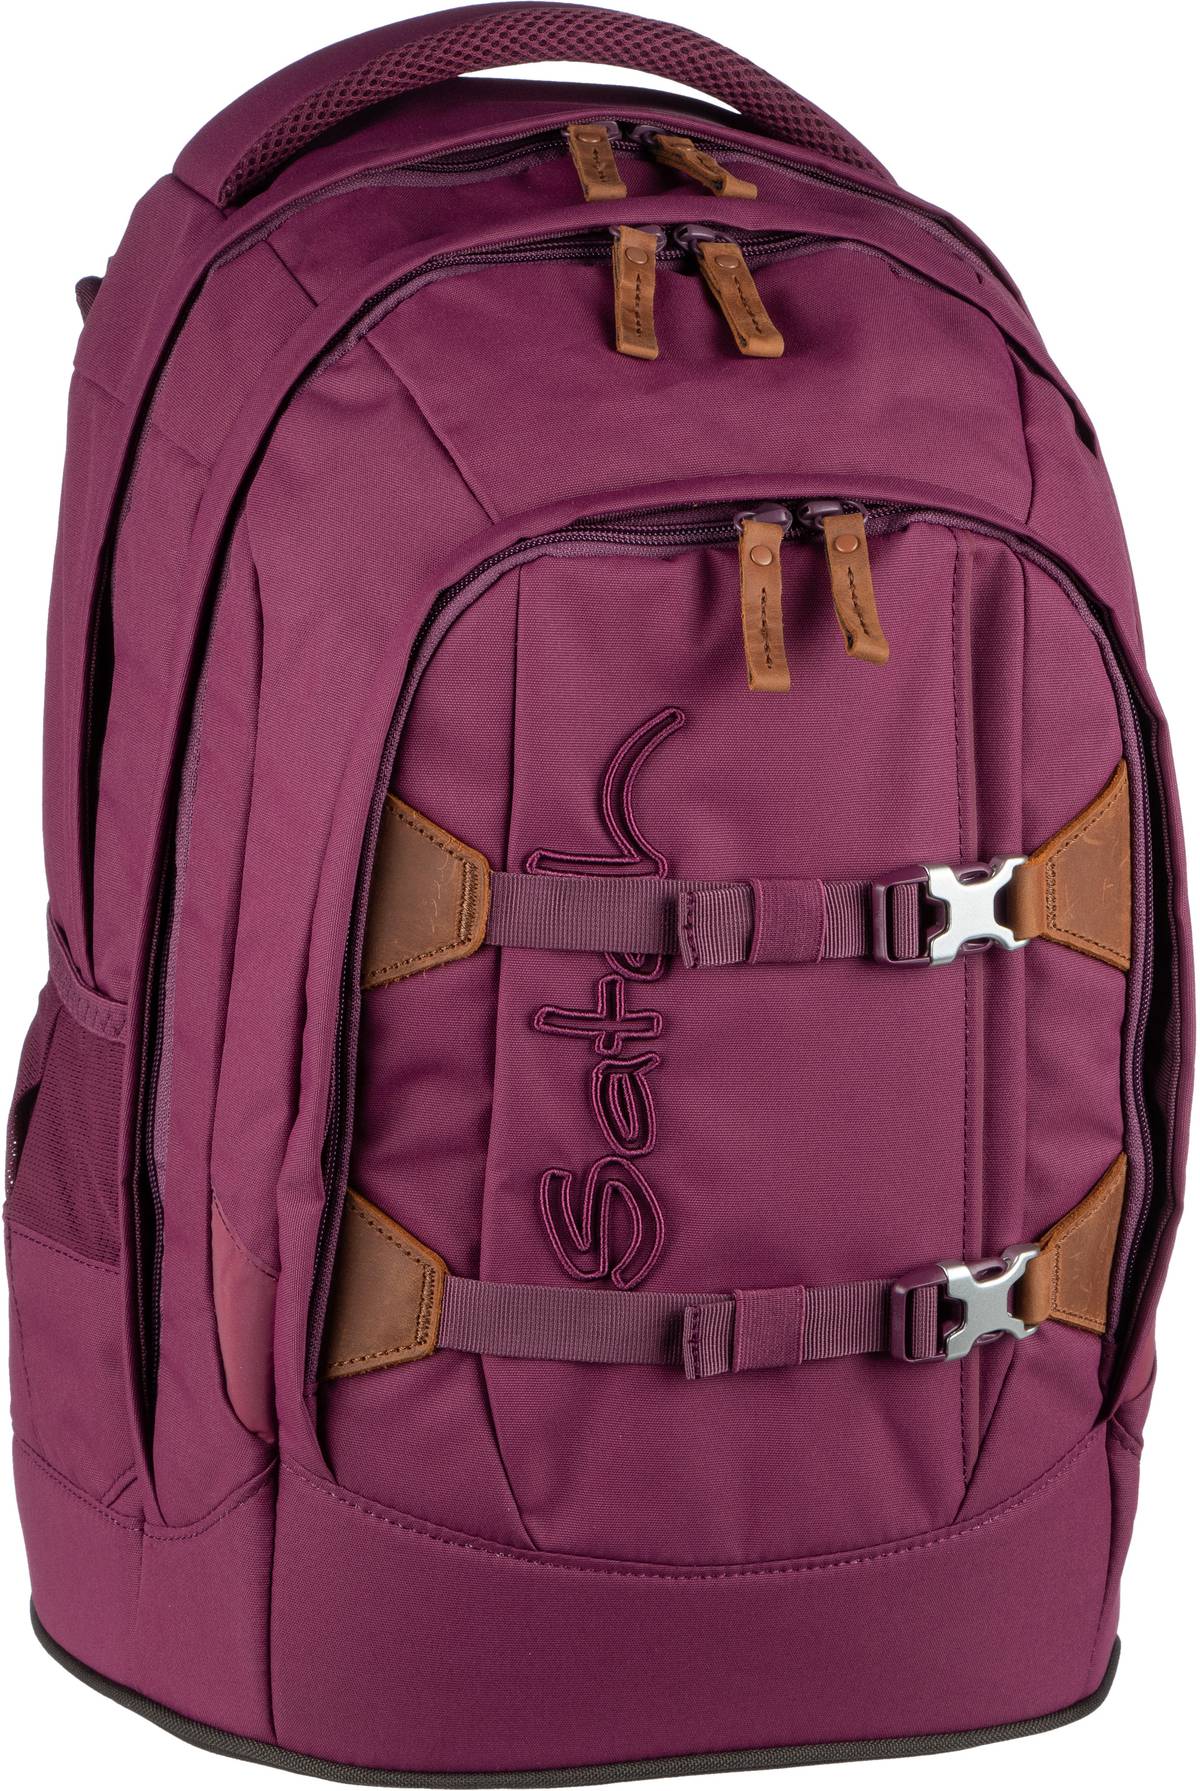 satch satch pack Nordic Edition - Nordic Berry